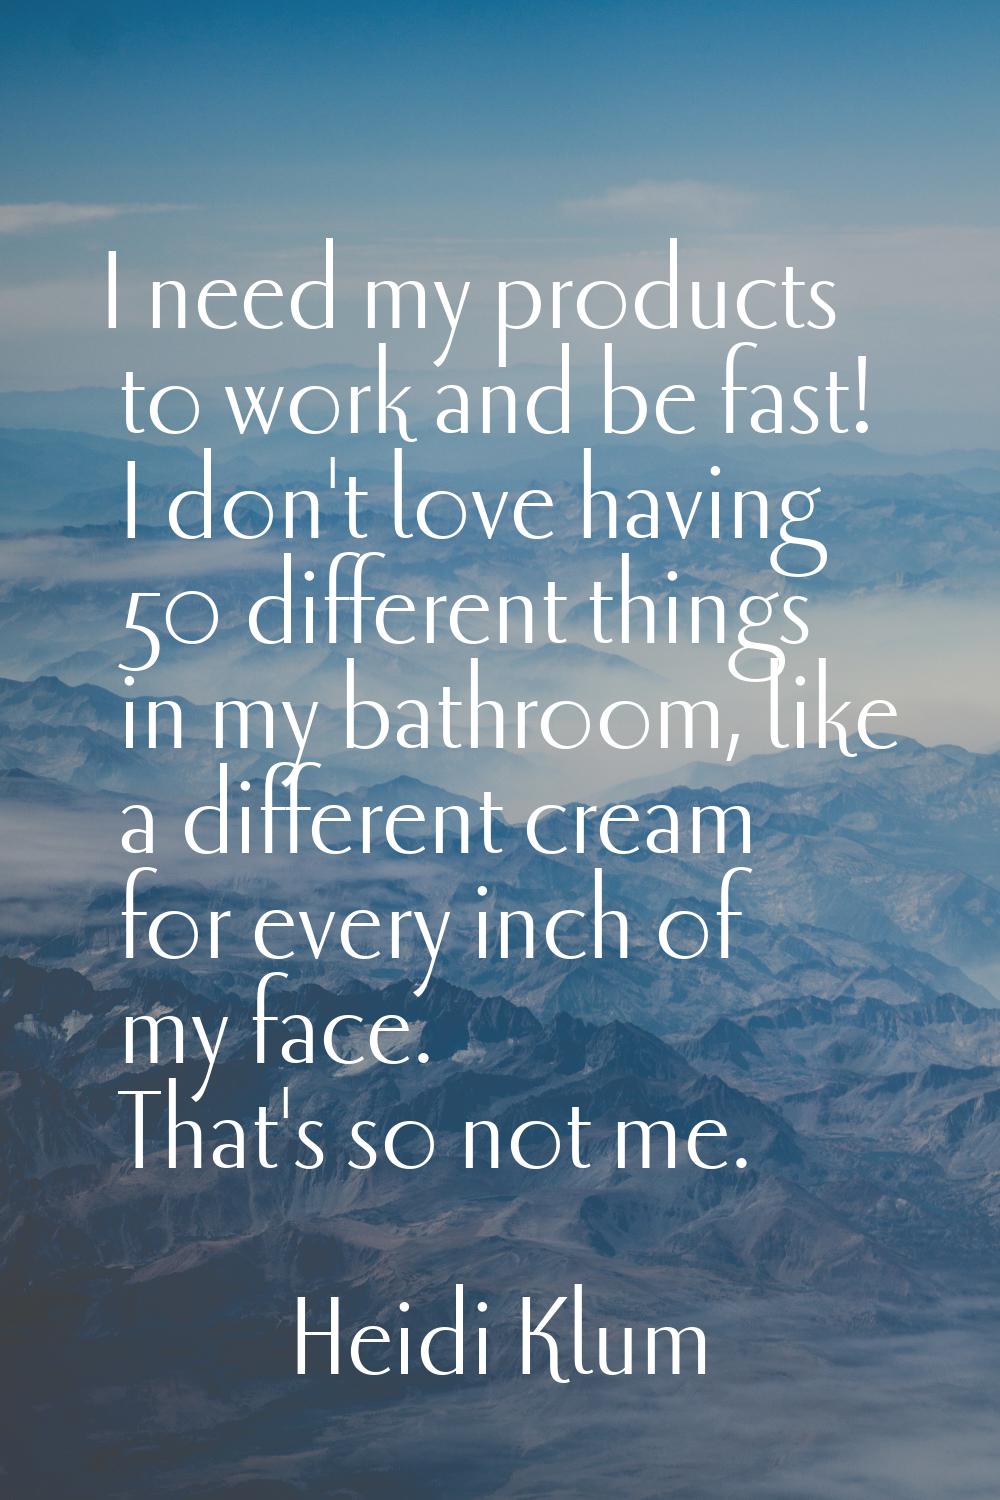 I need my products to work and be fast! I don't love having 50 different things in my bathroom, lik